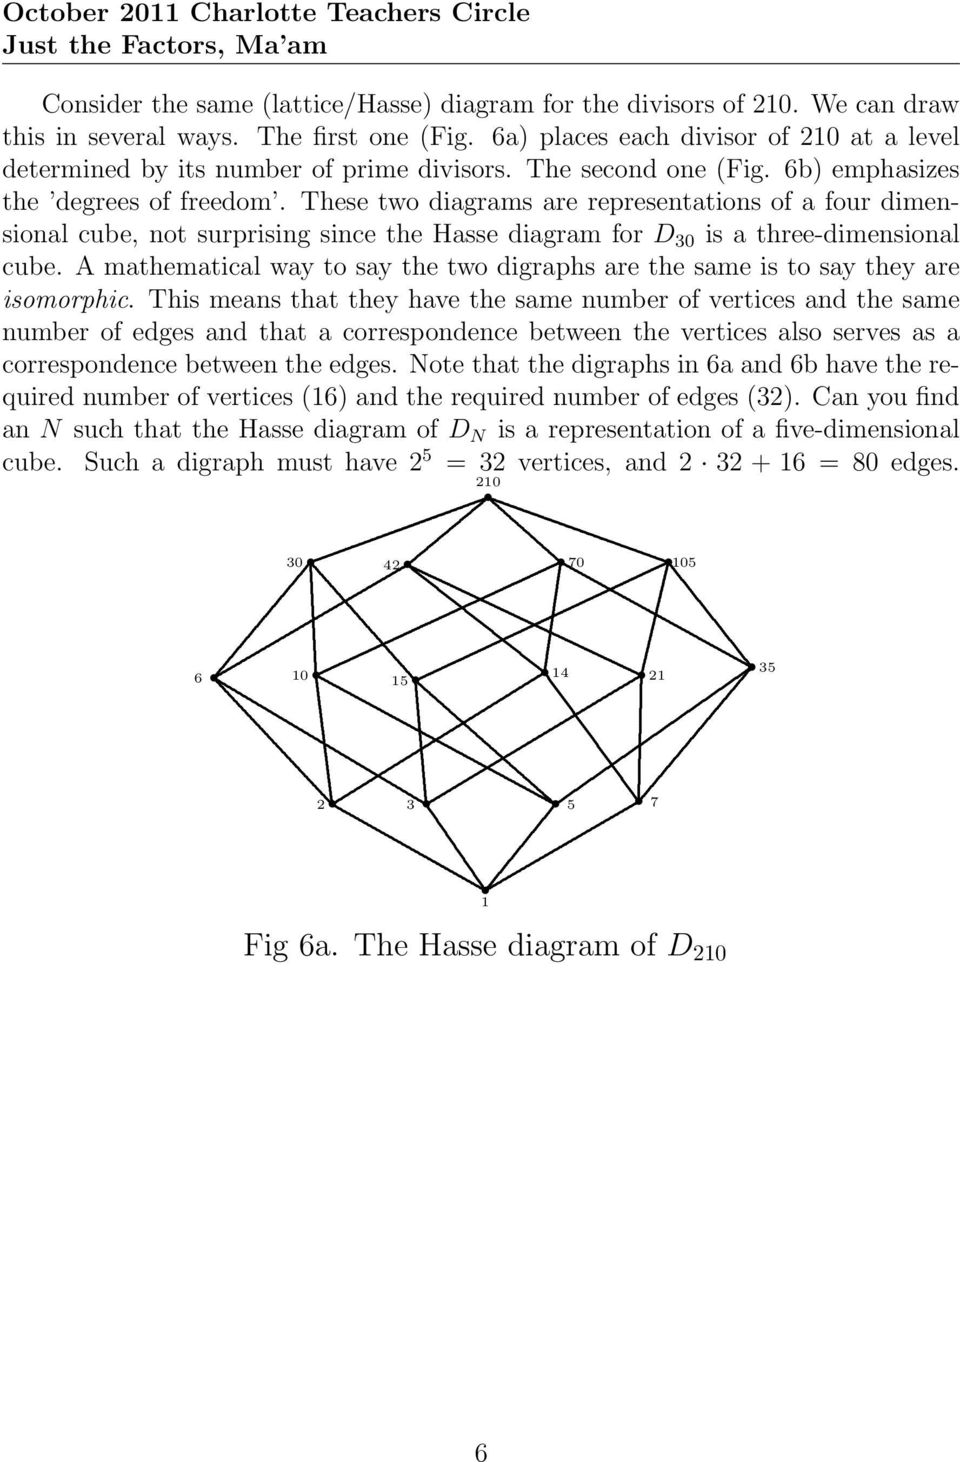 three-dimensional cube A mathematical way to say the two digraphs are the same is to say they are isomorphic This means that they have the same number of vertices and the same number of edges and